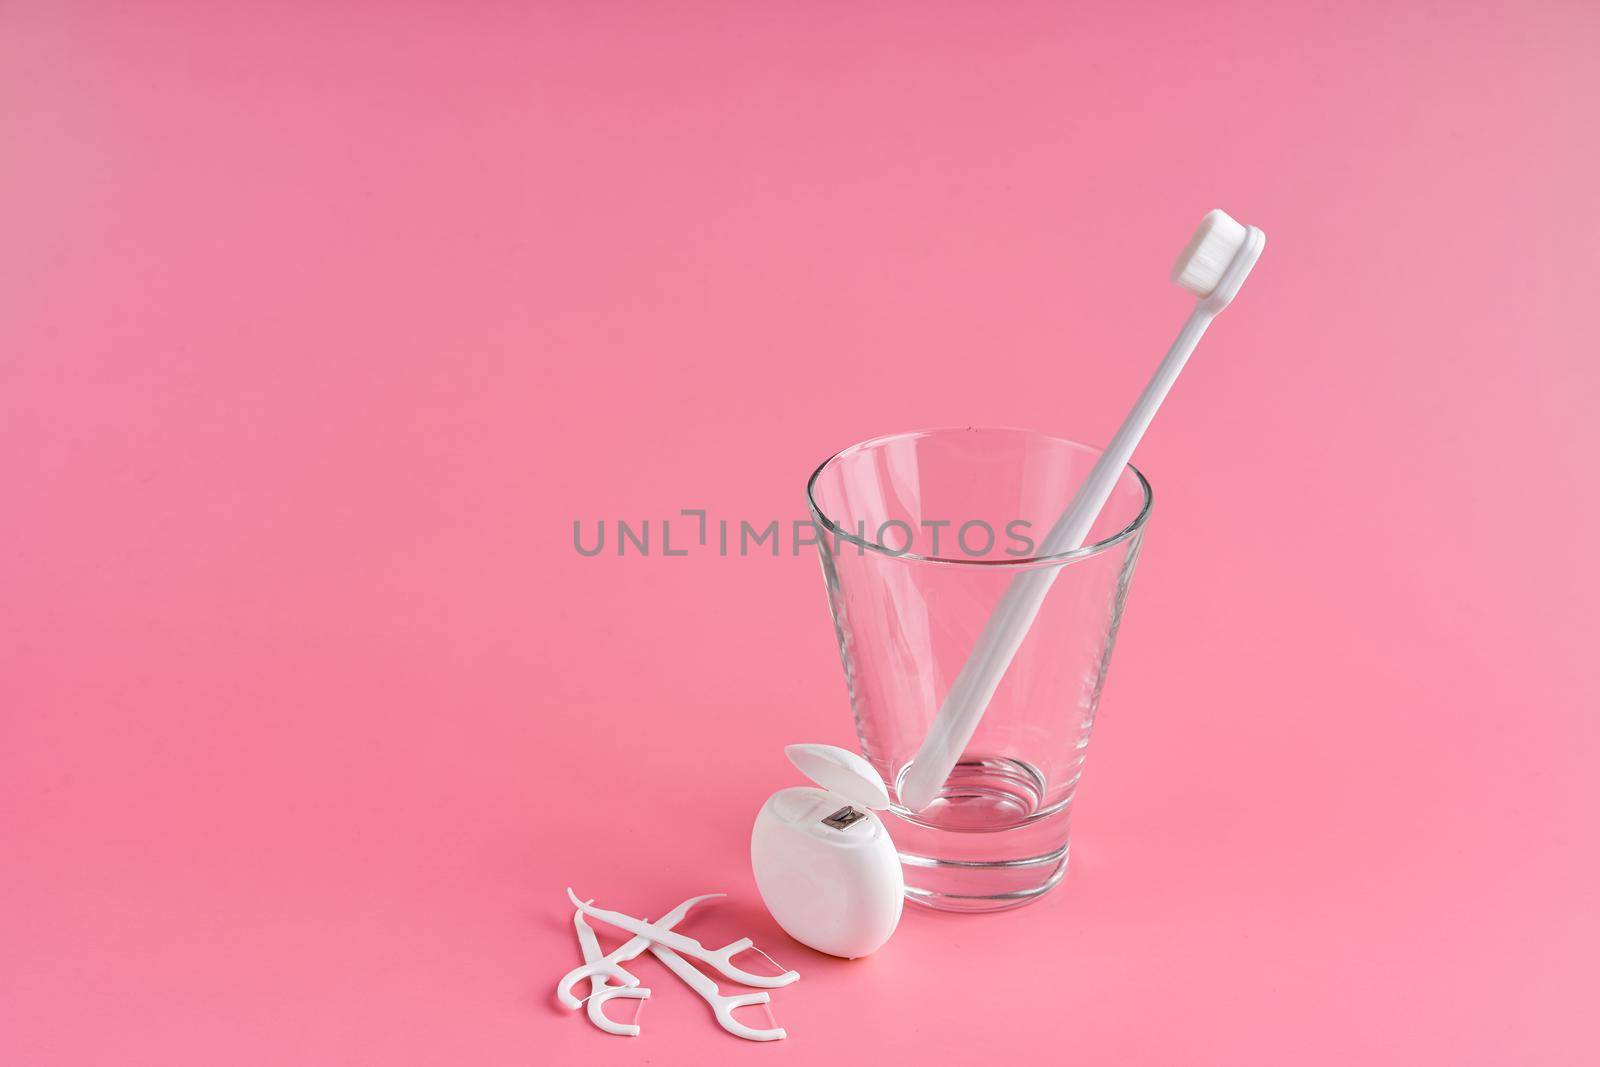 Fashionable toothbrush with soft bristles. Popular toothbrushes. Hygiene trends. Oral hygiene kit. Toothbrushes in glass, floss thread and toothpicks on a pink background.